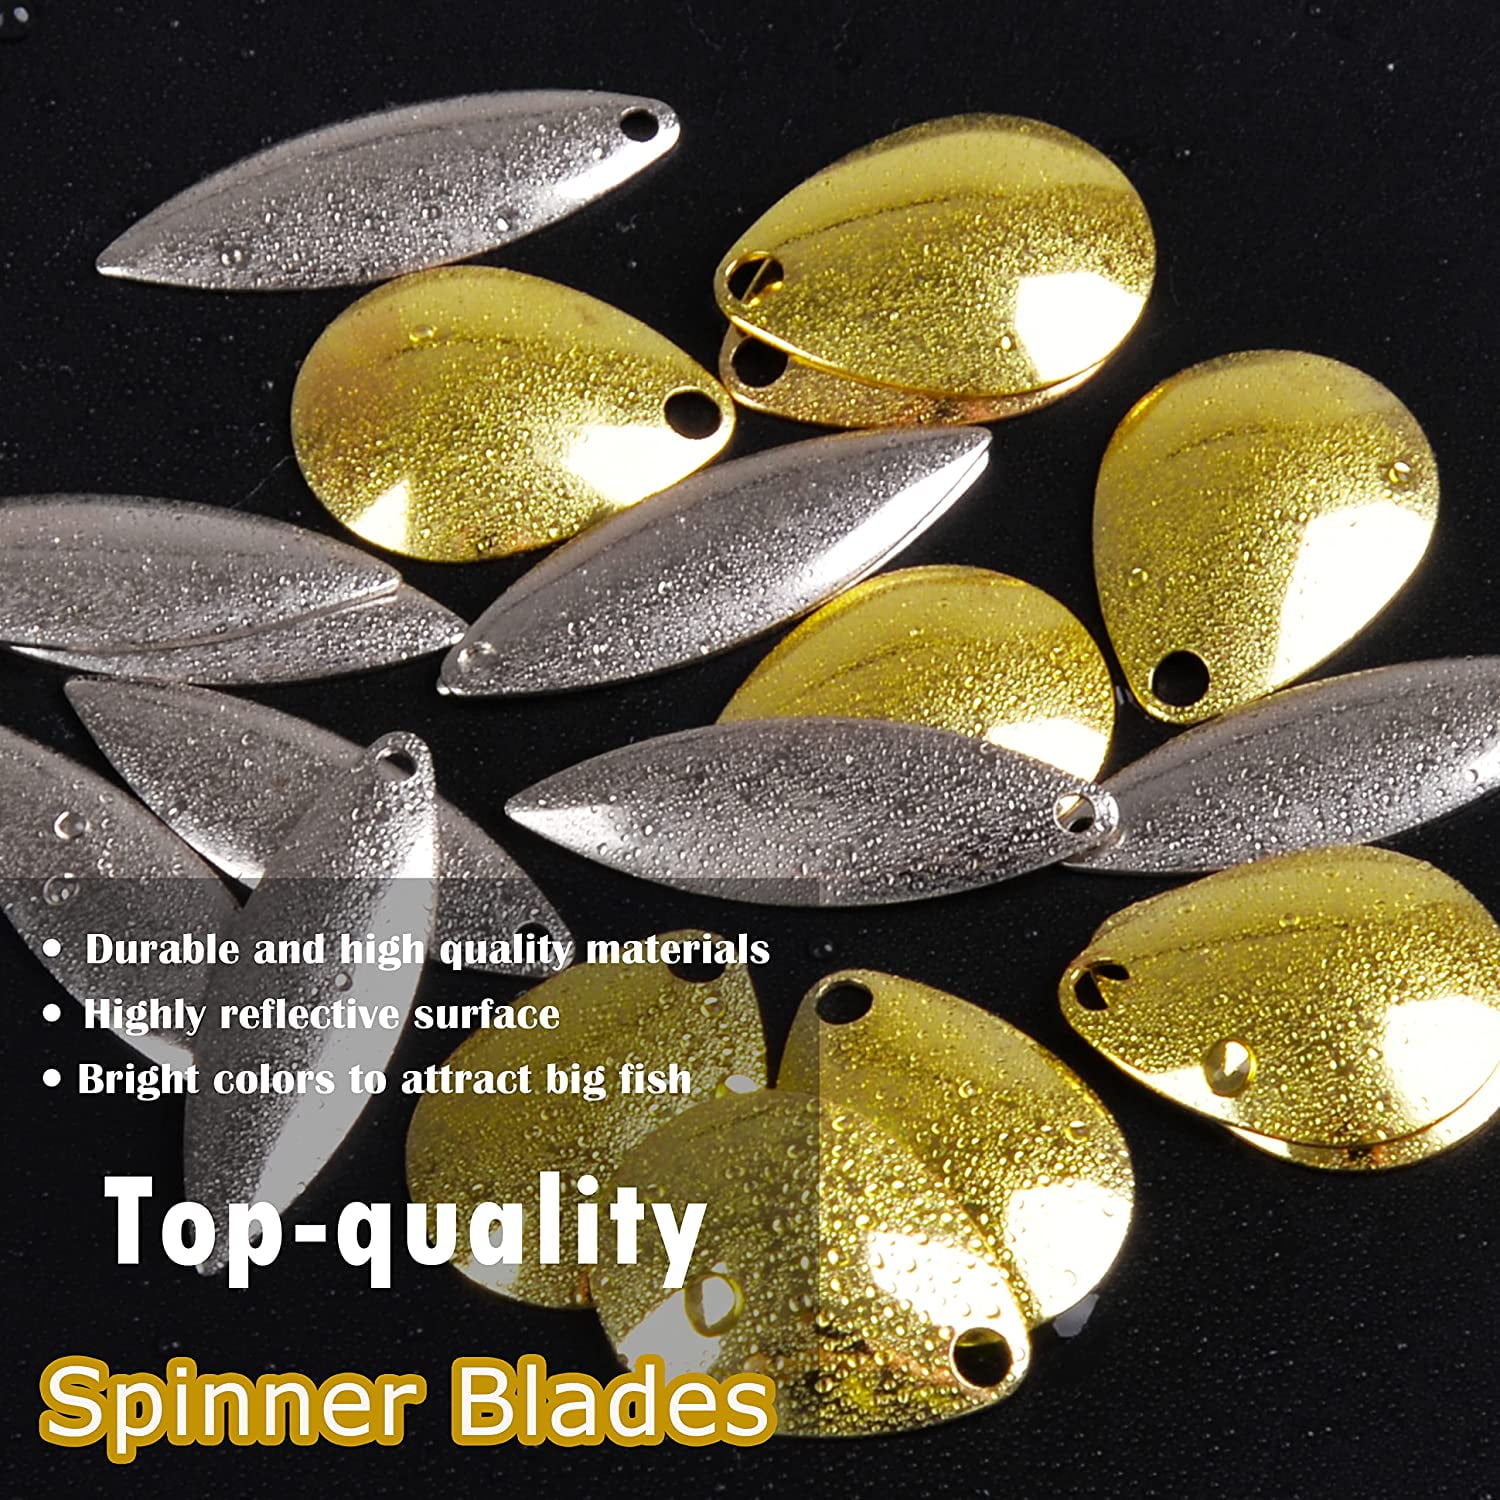 241pcs Spinner Rigs Fishing Lures Making Kit Accessories Including Spinner  Blades,Floats,Fishing Beads,Clevis Brass Links Fishing Lures Rig